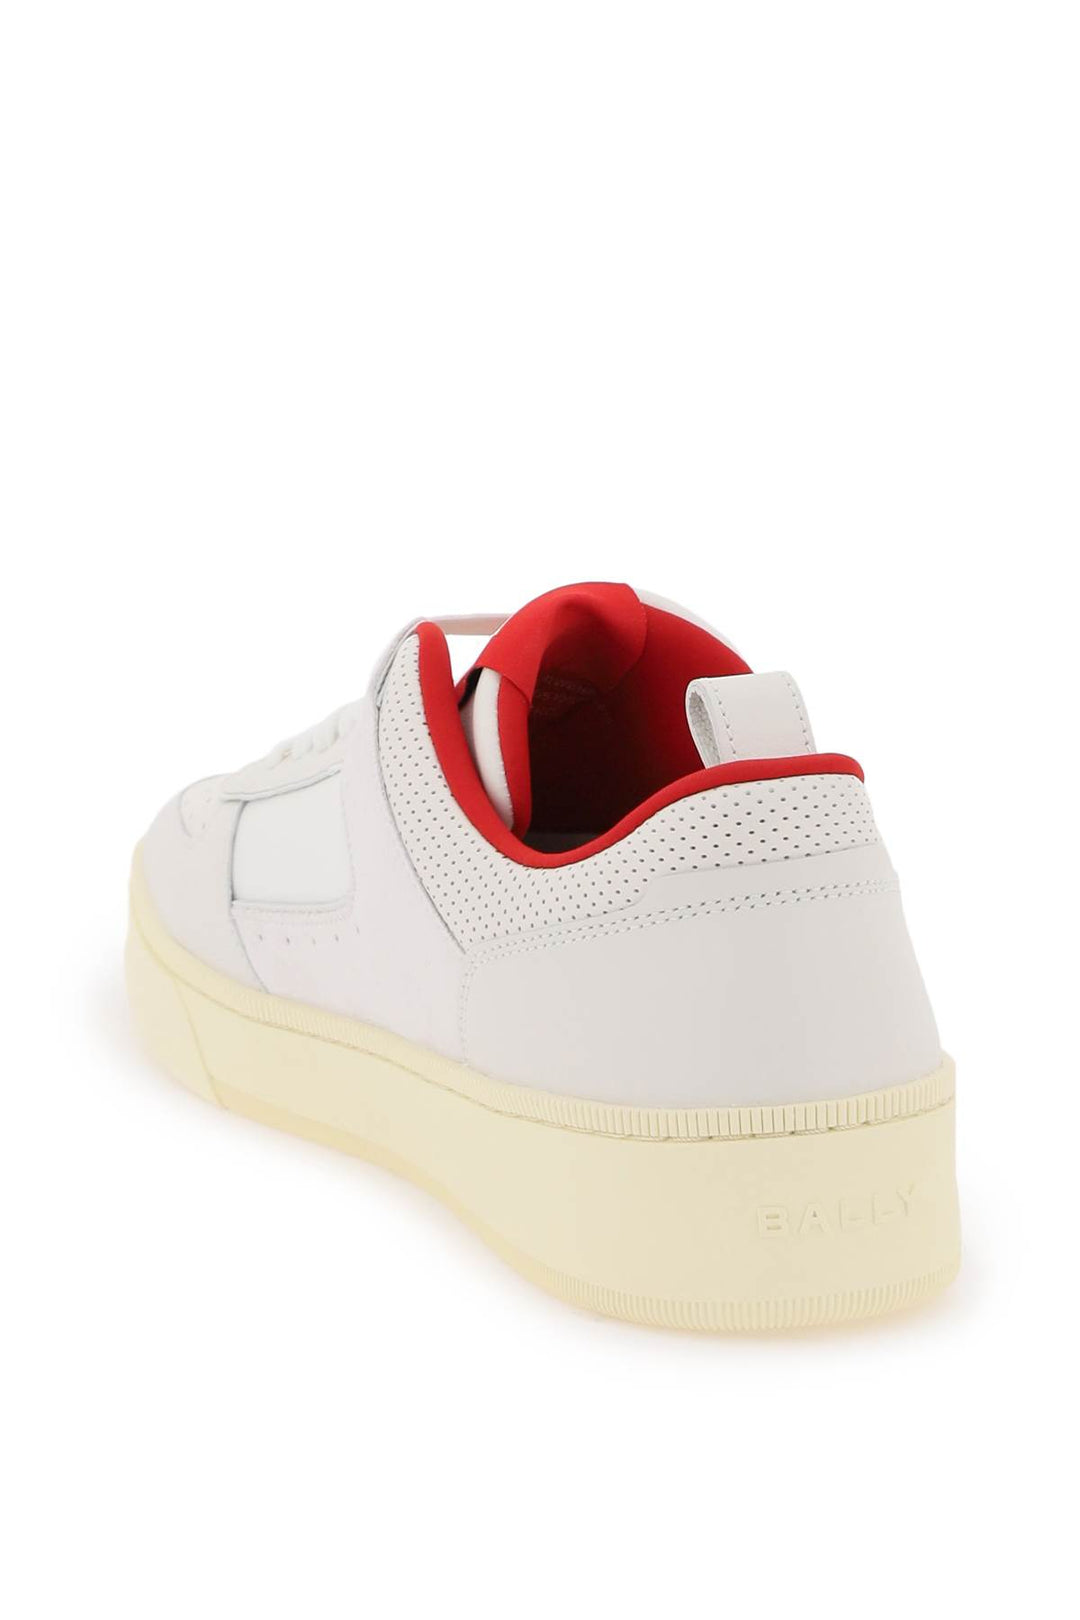 Bally Leather Riweira Sneakers   Bianco